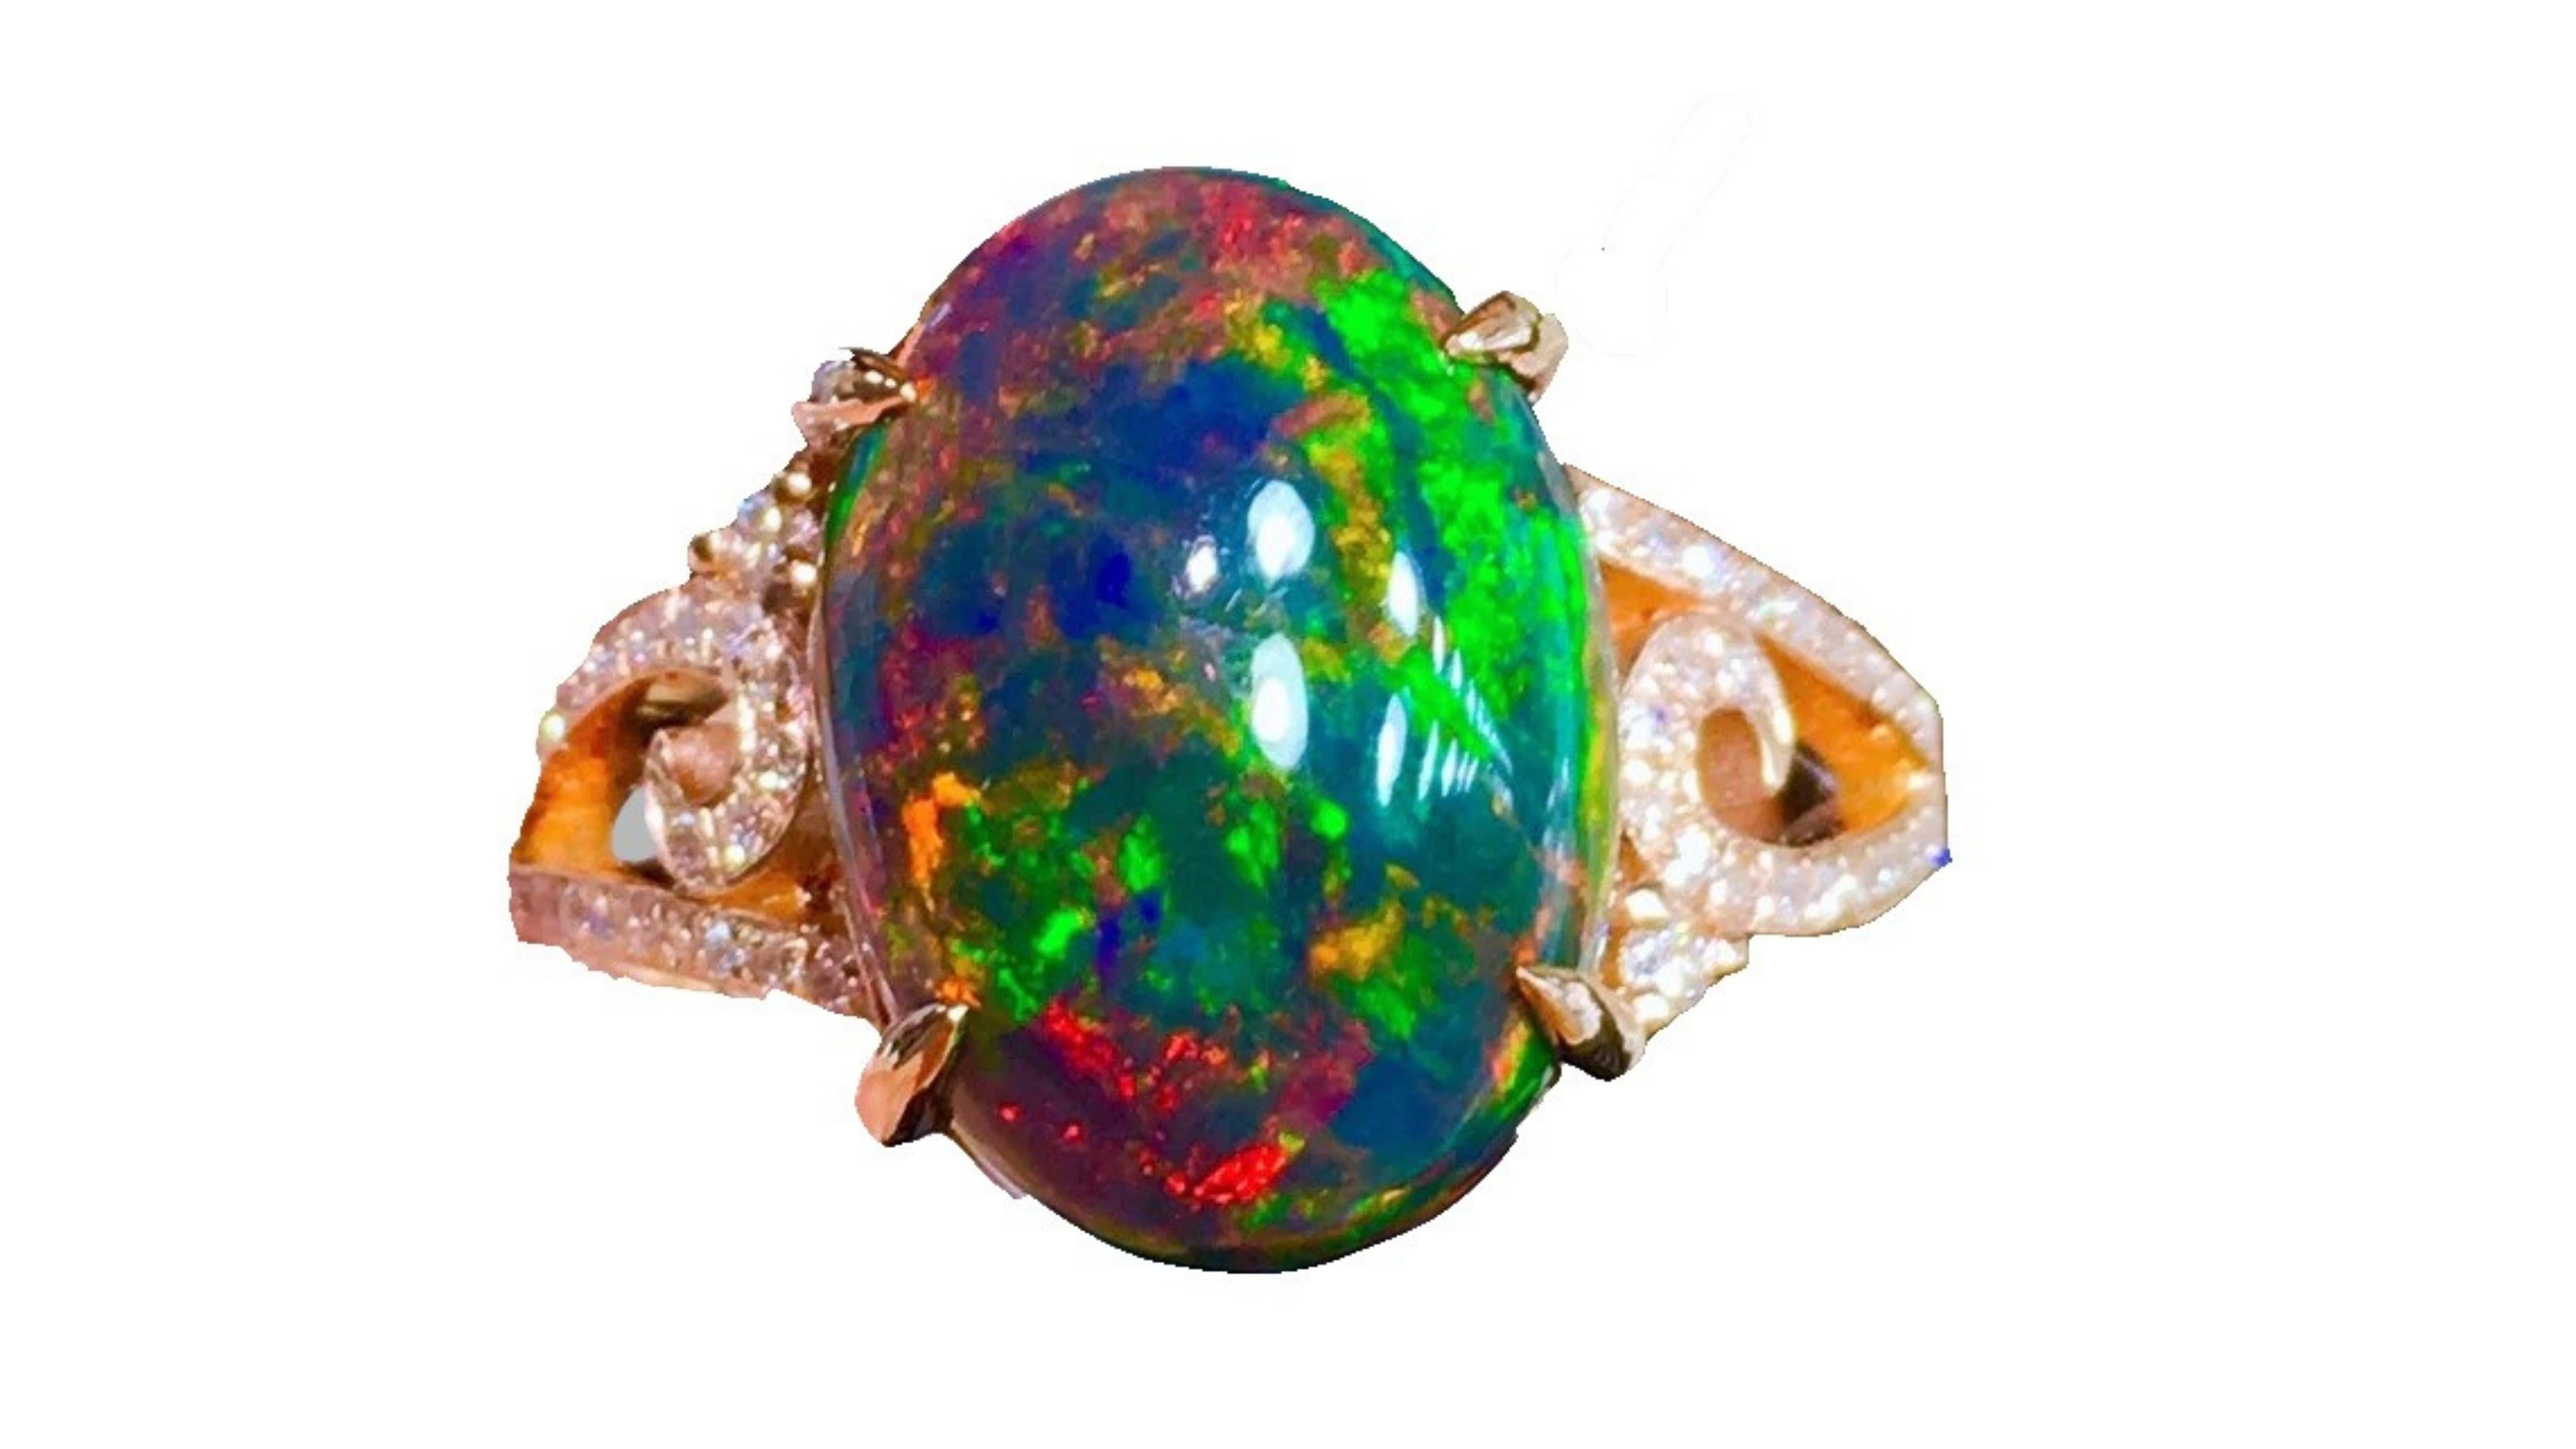 This Black Ethiopian Ring with 38 White Diamonds really stands out as it shows off very bright colors  Blue Green Orange Yellow Red 

Precious opal mined in Ethiopia began entering the gem and jewelry market in 1994. This opal originated from a